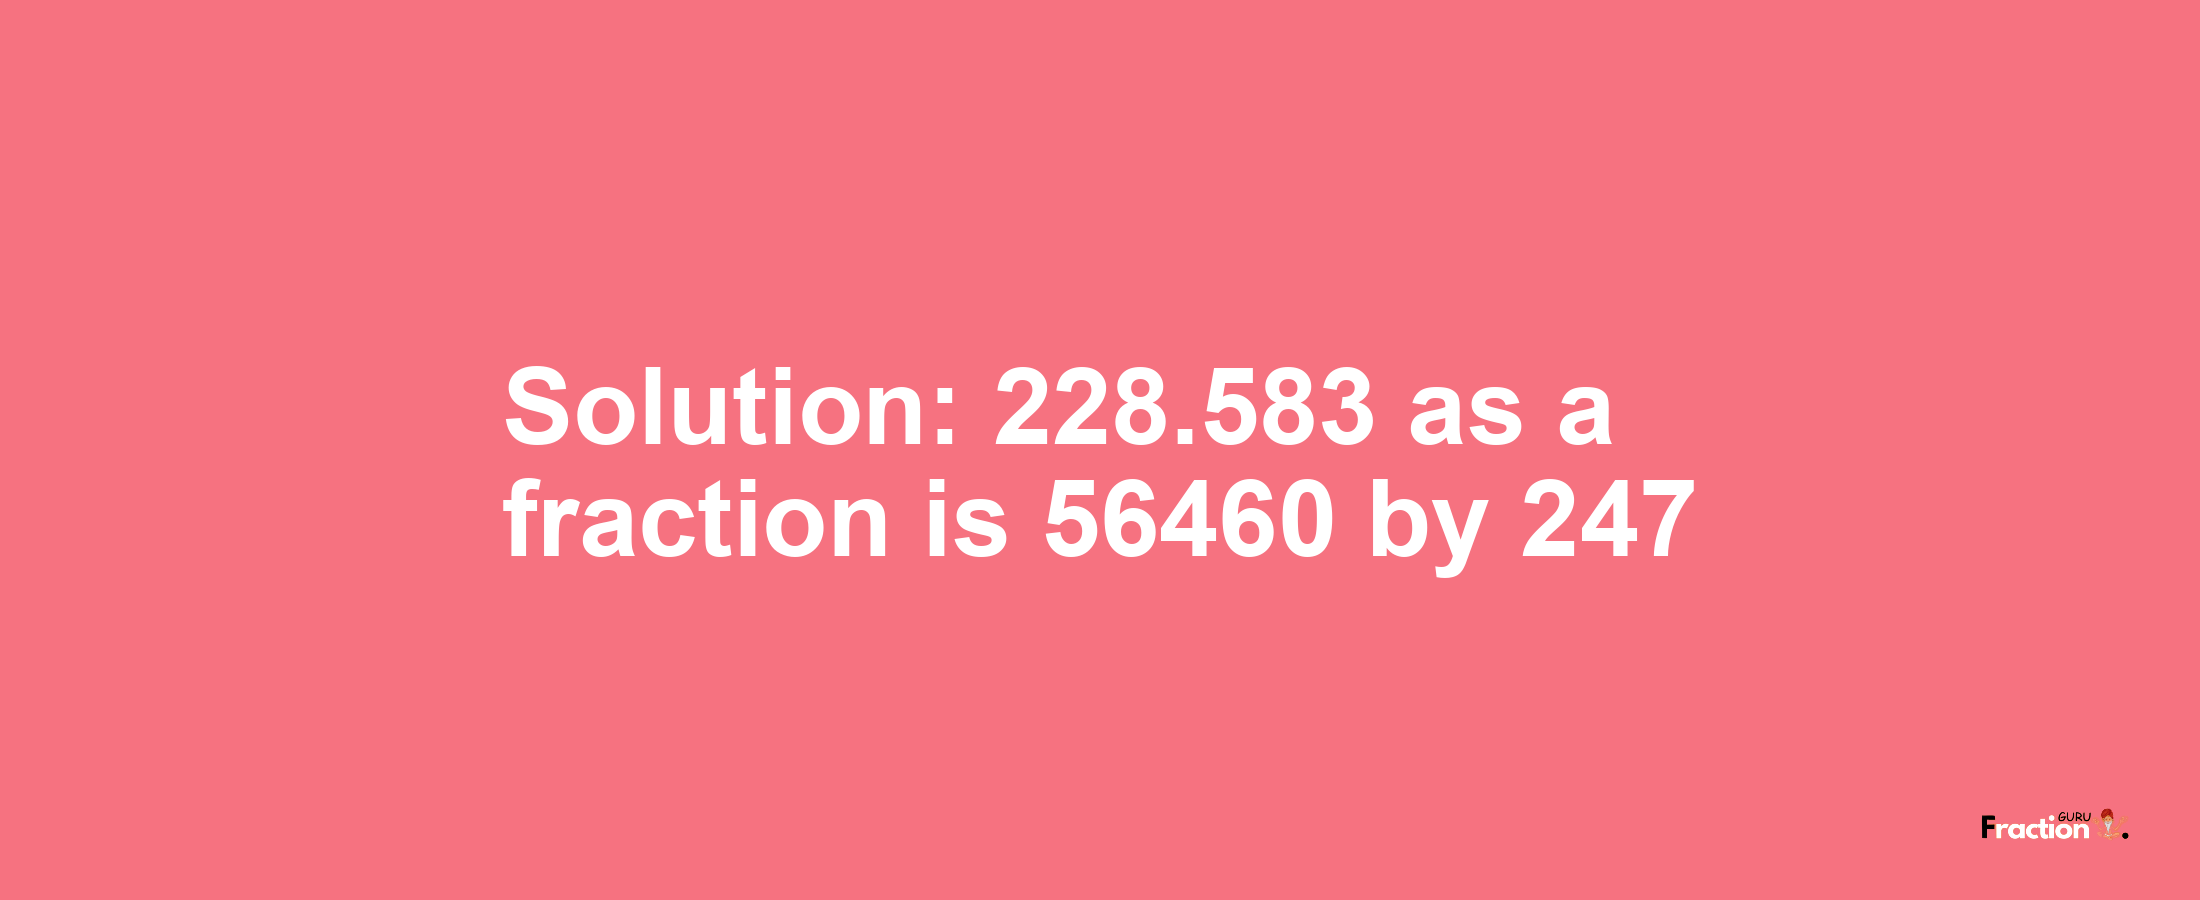 Solution:228.583 as a fraction is 56460/247